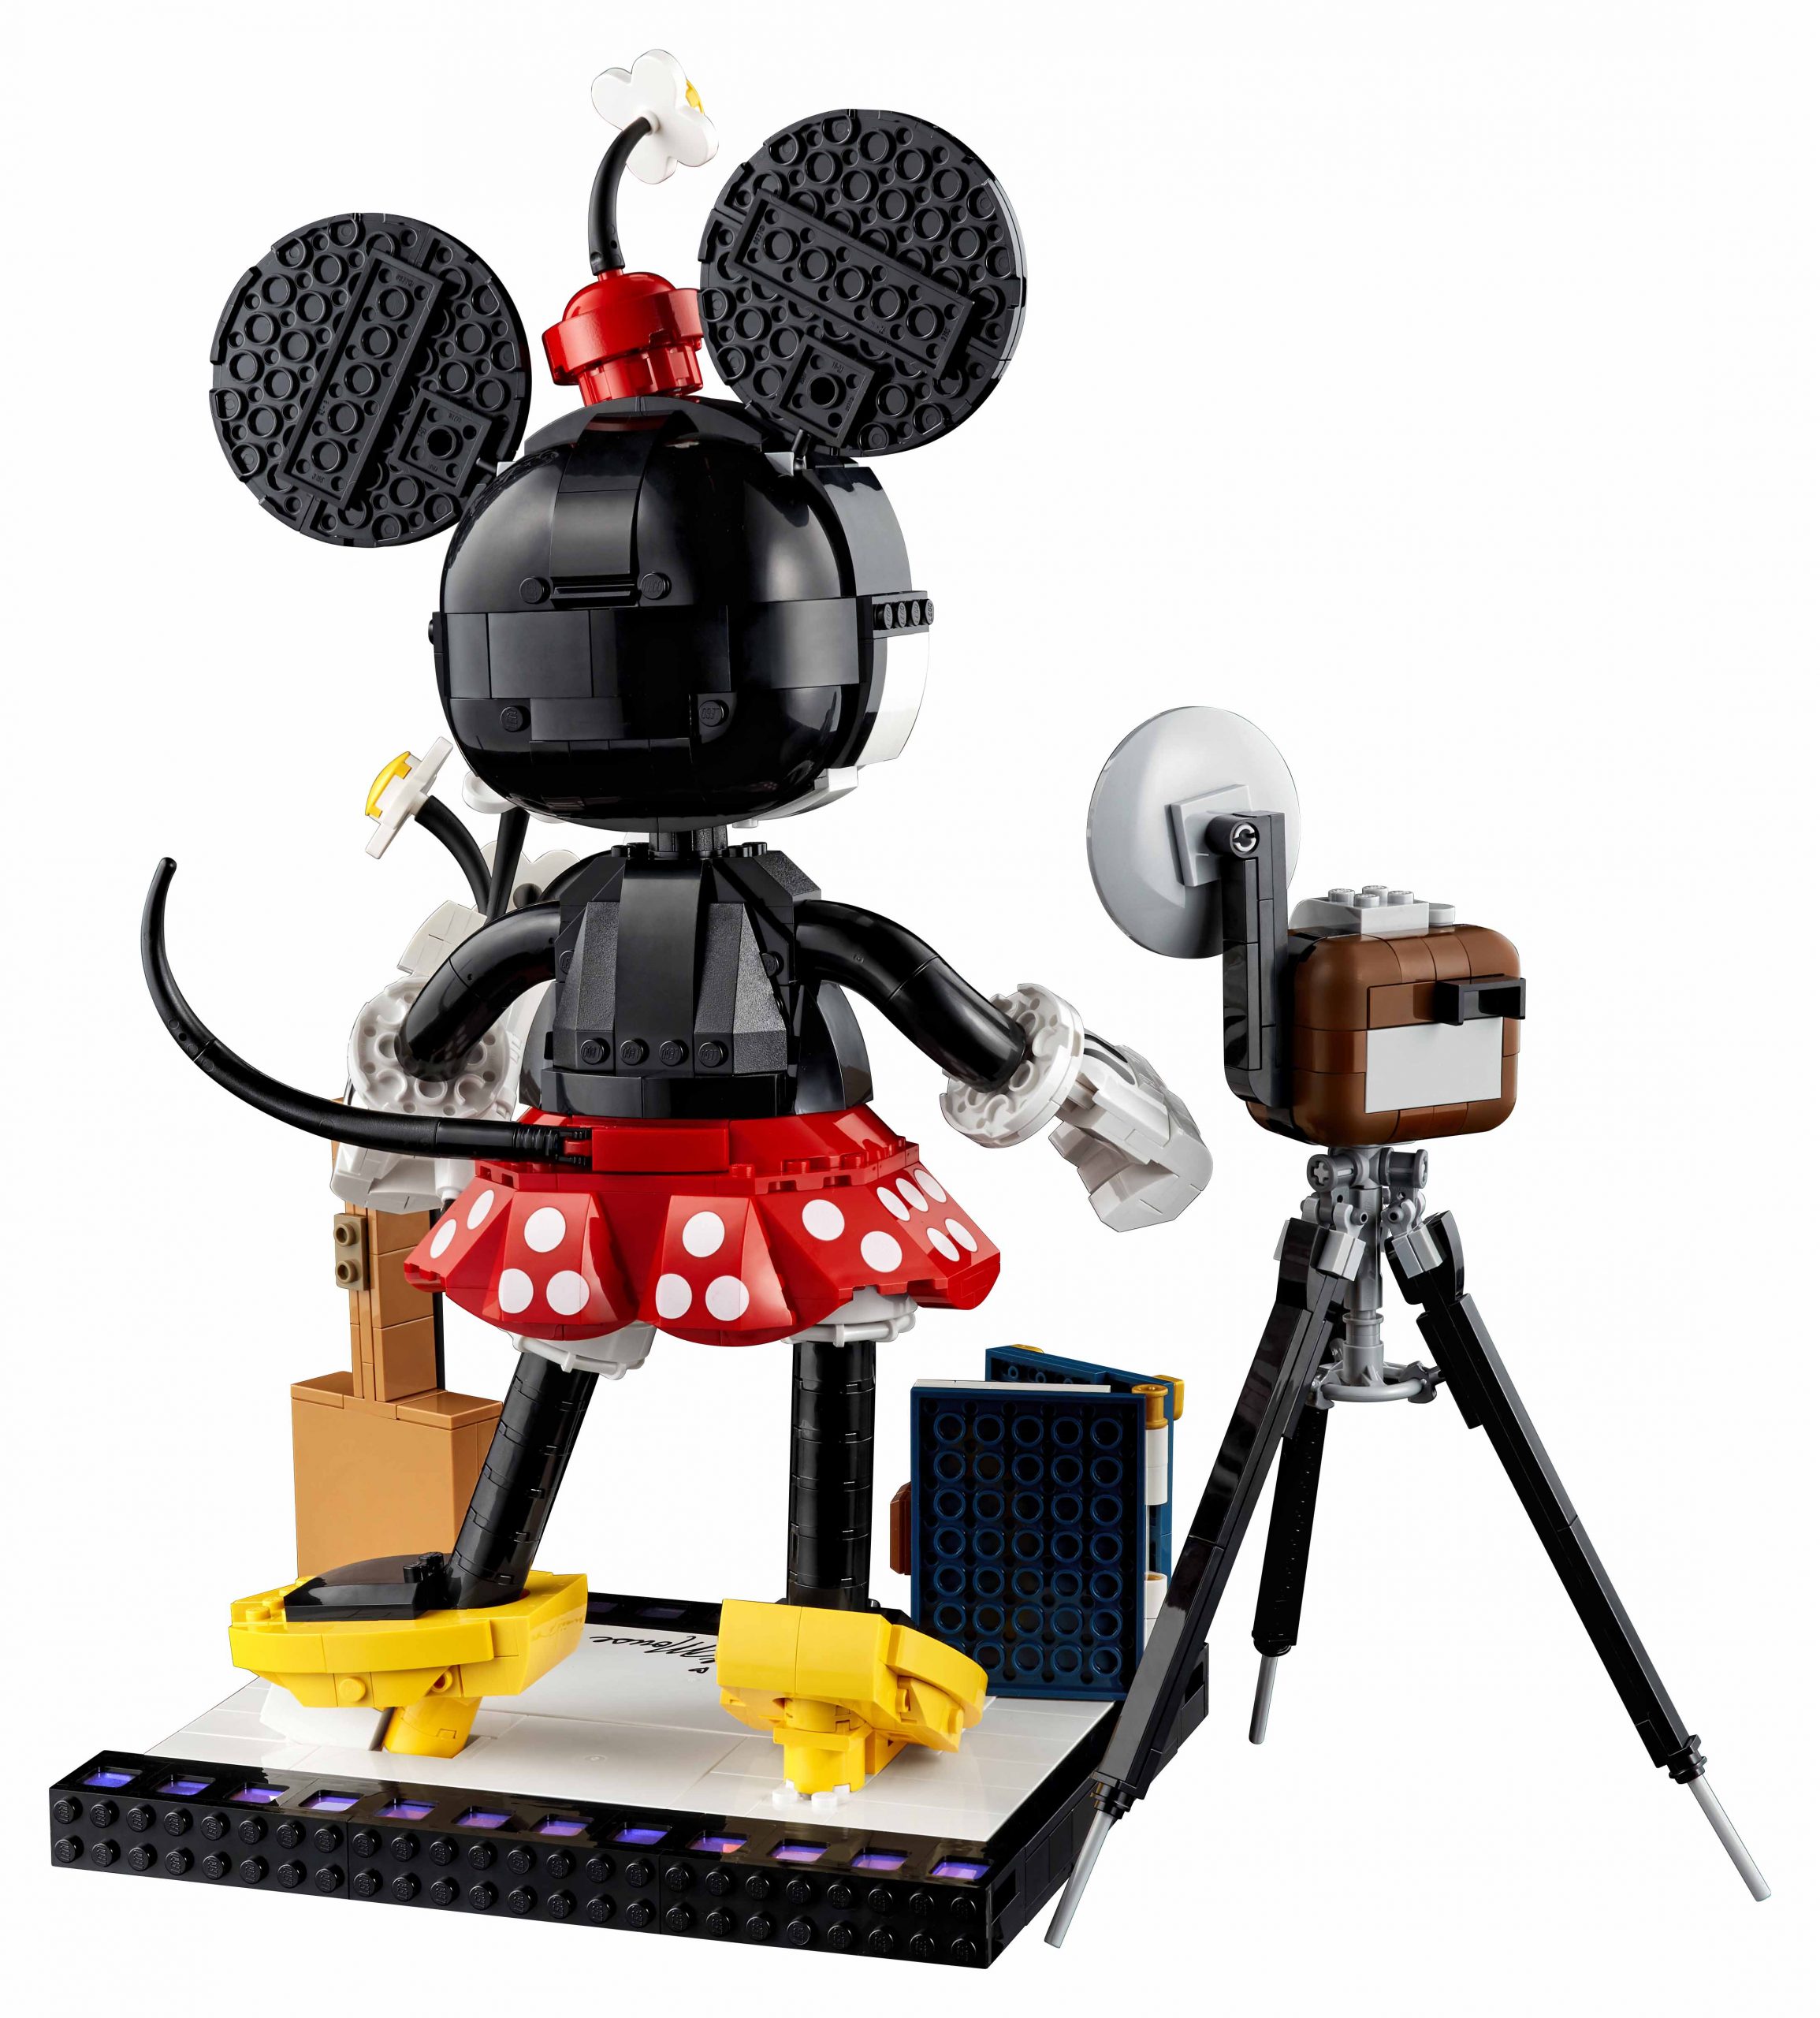 LEGO Disney Mickey Mouse & Minnie Mouse Buildable Characters (43179)  Officially Announced - The Brick Fan